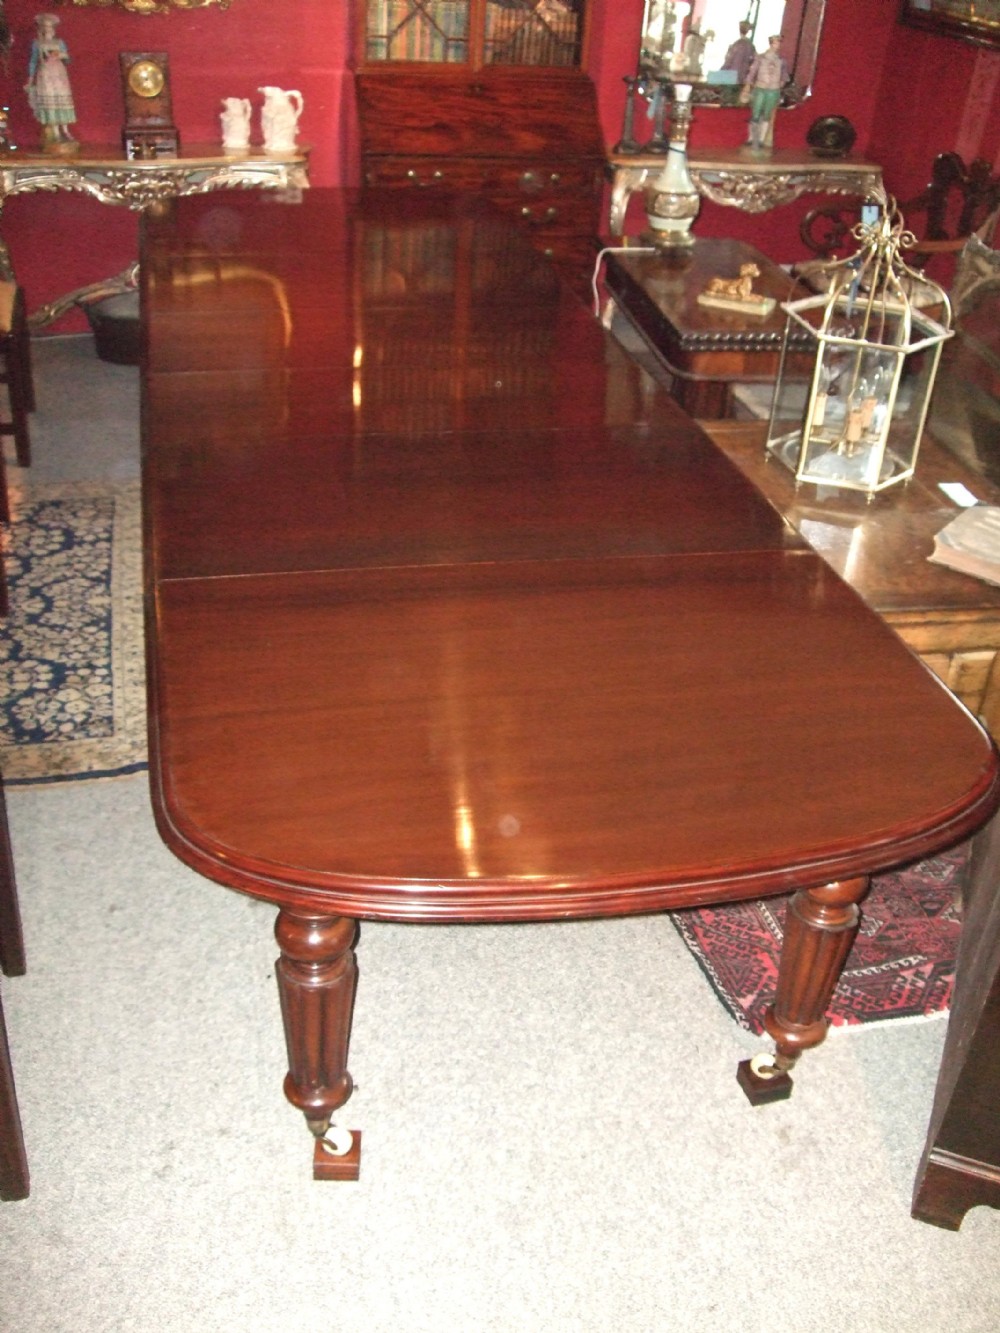 19th century mahogany pull out dining table with 4 leaves